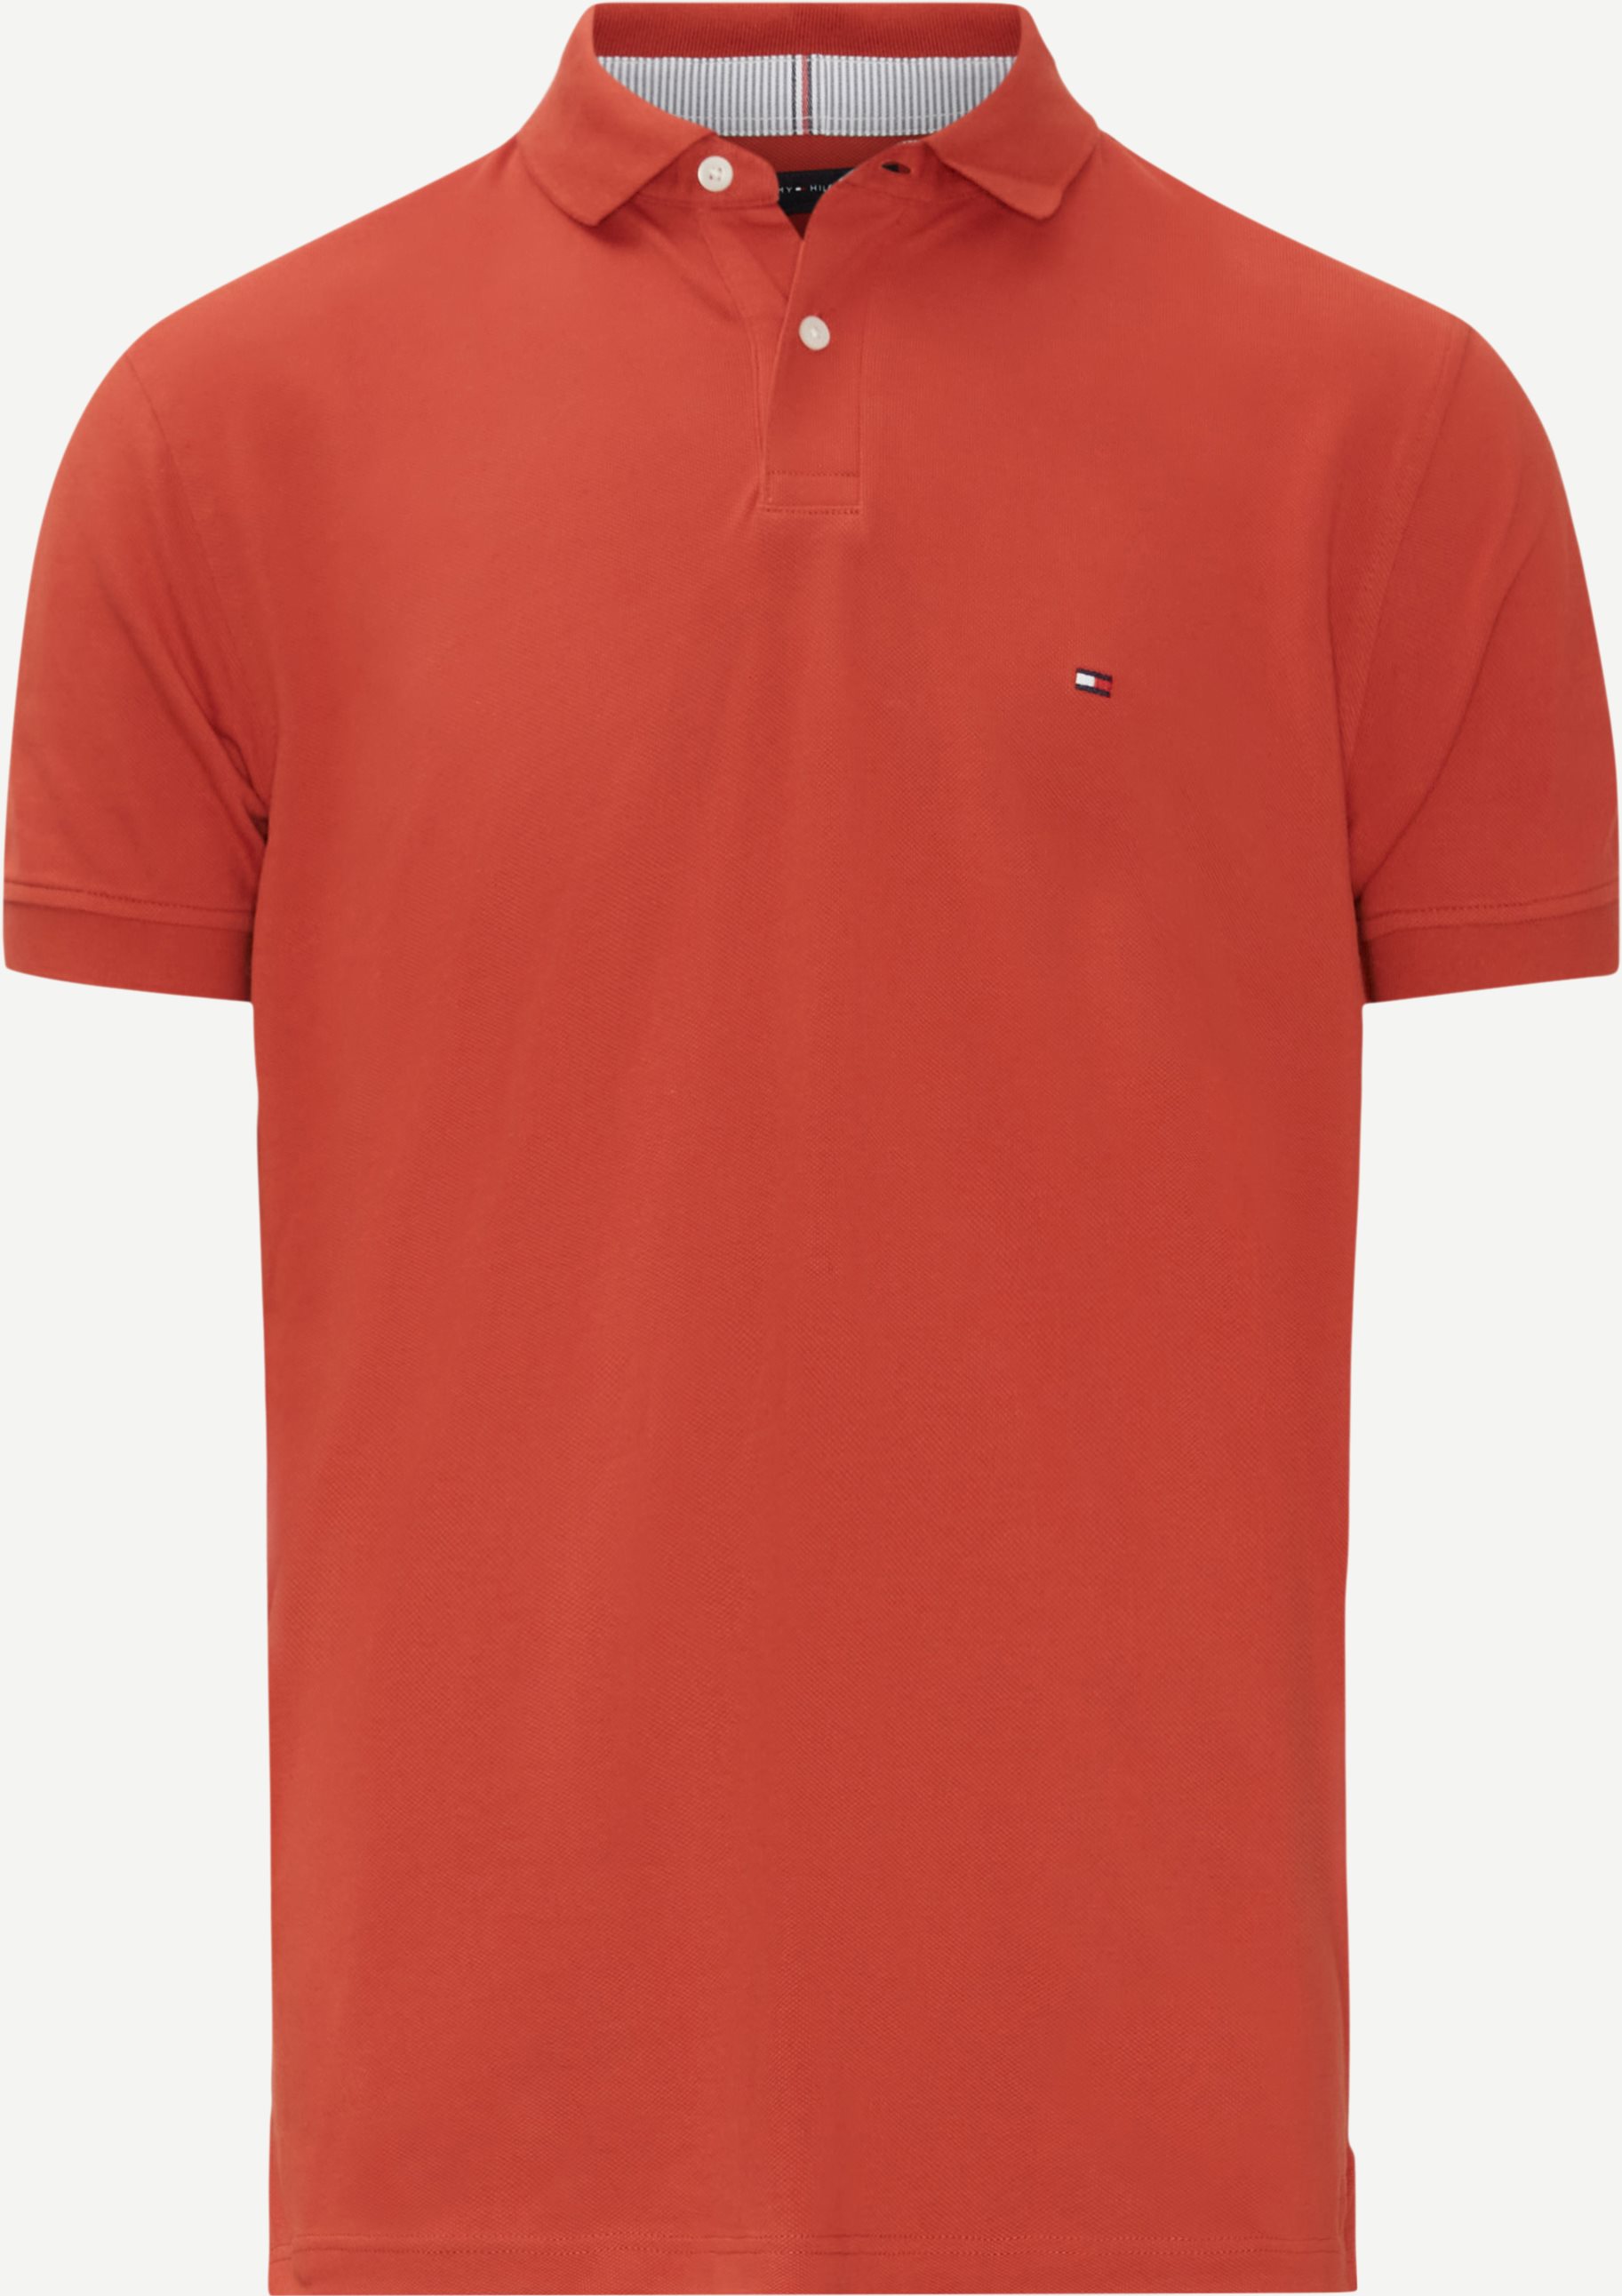 T-shirts - Regular fit - Red